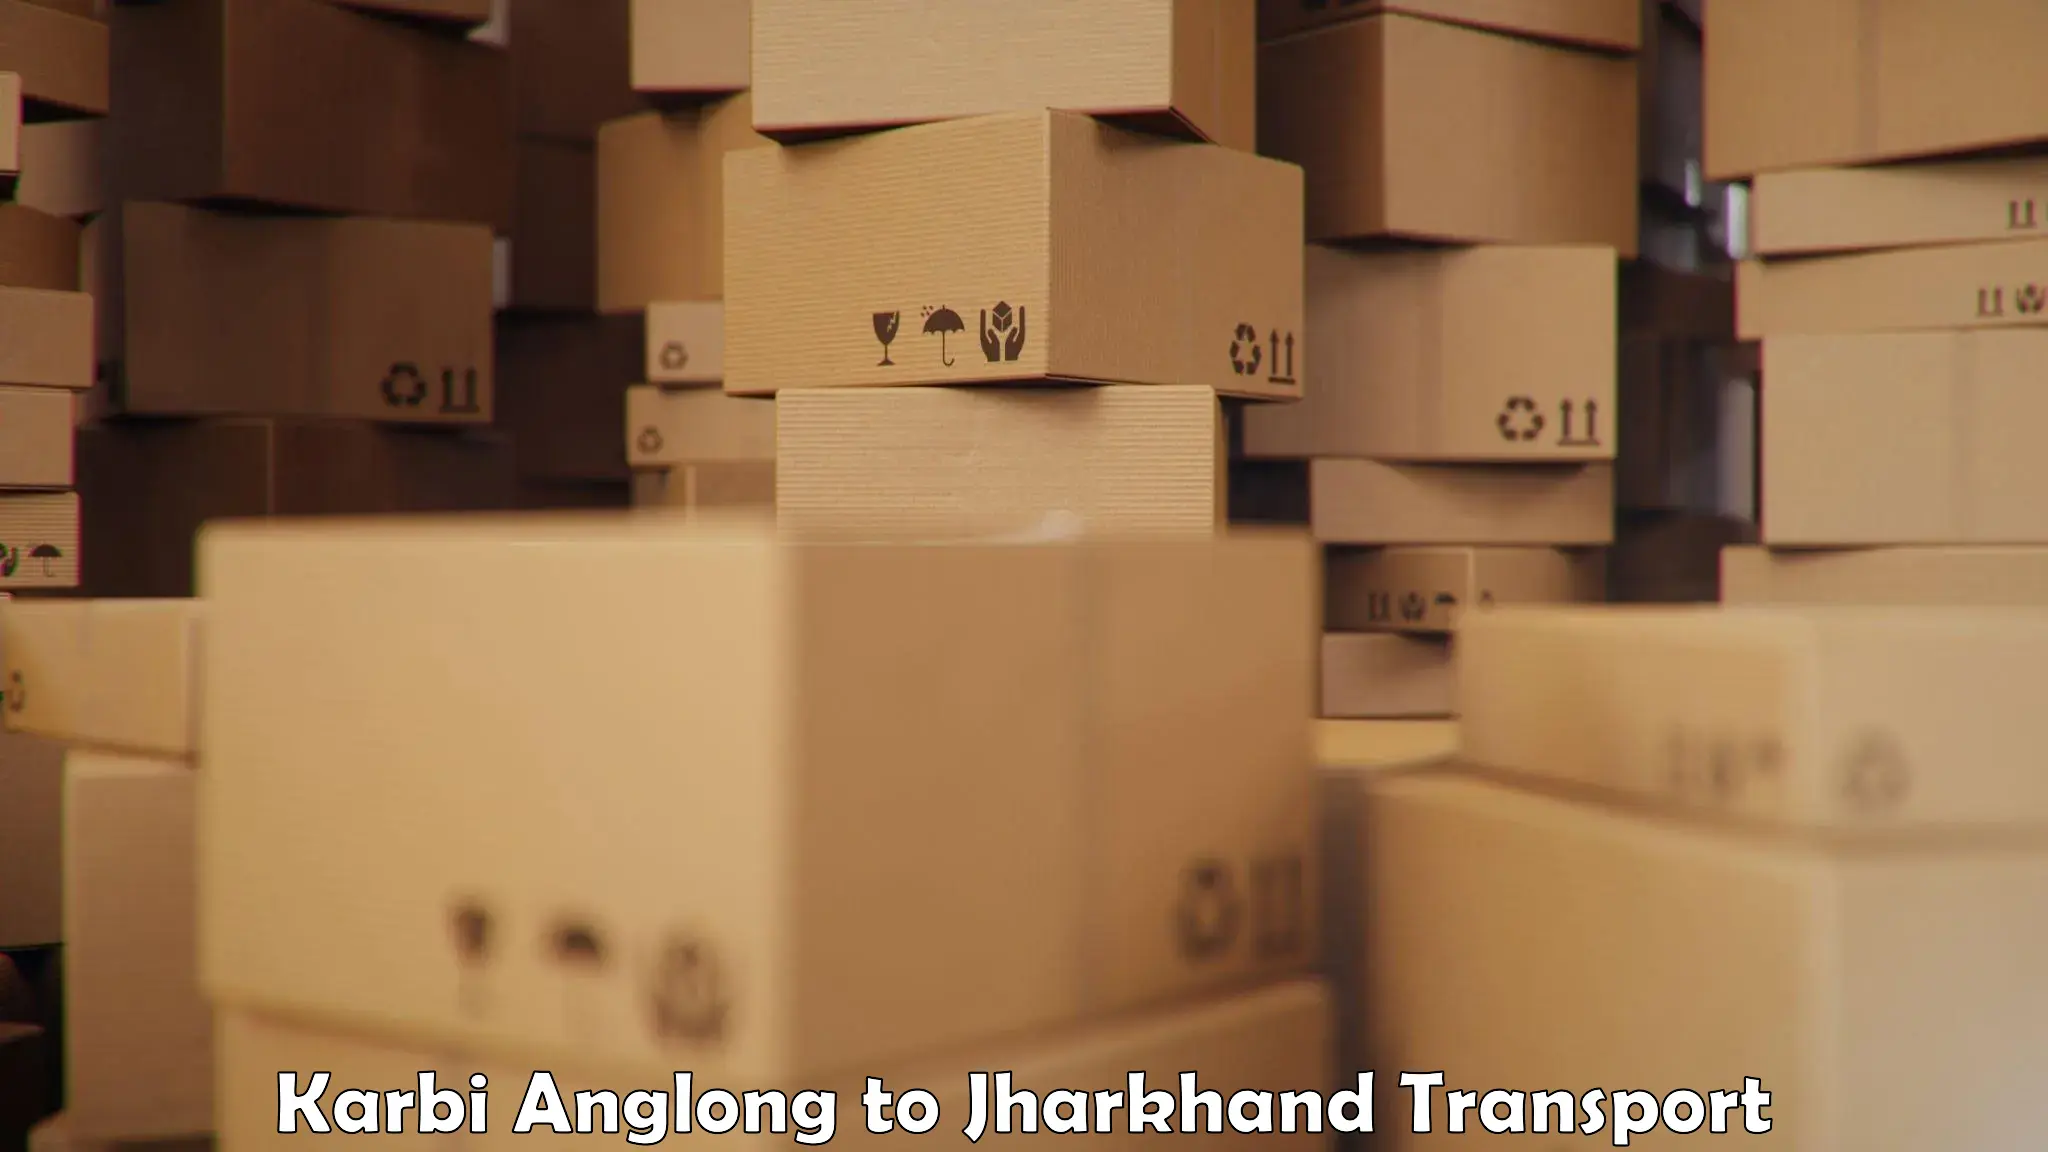 Lorry transport service Karbi Anglong to Jharkhand